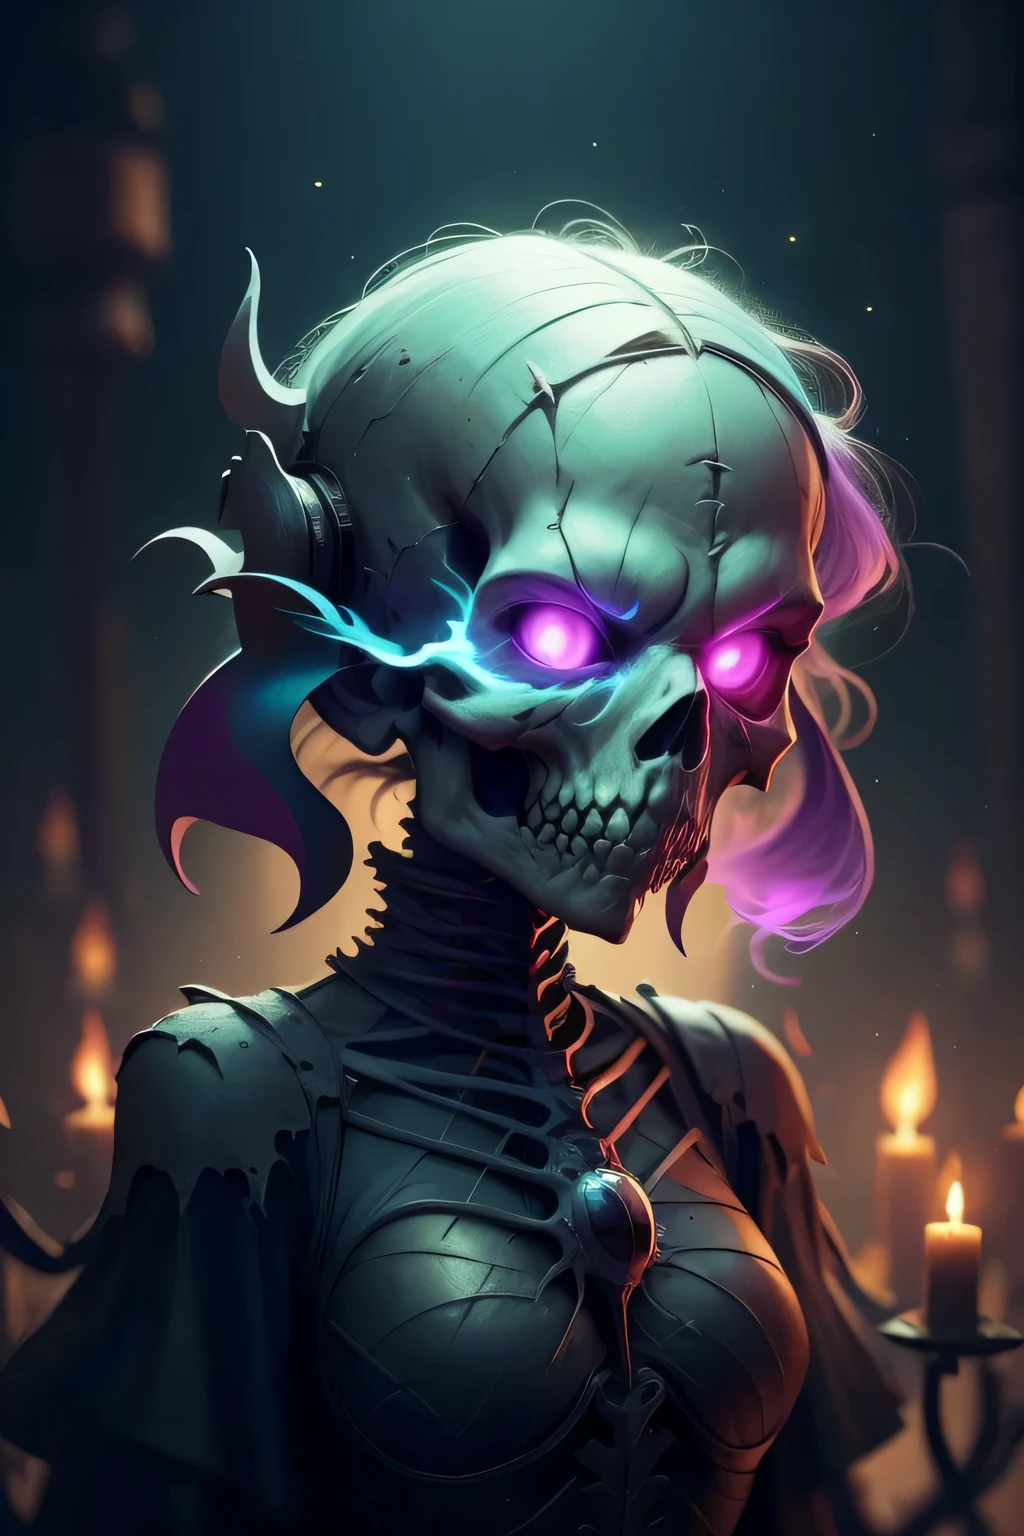 Generate a full-body image of a necromancer standing in the center of a dark and foreboding location. The necromancer's eyes must have a completely white iris, level of detail 1.2. Your face should display a mixture of sensuality and demonic expression. The necromancer's skin should be pale and dead, contrasting with the dark environment. Surrounding the necromancer is a shadowy landscape of rotting, dismembered bodies rising from the earth, souls of the dead, and candles illuminating the symbols of dark magic, detail level 1.2. using advanced rendering and modeling techniques. Use the following software for creation: 3DS Max, SketchUp, SolidWorks, AutoCAD, Blender, Vectary, MeshMixer, and Unreal Engine 5. Apply photon mapping, radiosity, and physical rendering techniques with automatic white balance for realistic lighting. Create a cinematic lighting setup with a slightly heightened twilight effect. Make sure the final image has a soft focus effect but remains ultra-detailed and realistic. Artwork should not be based on a specific photograph. Evoke a sense of technology and high-quality craftsmanship, reminiscent of a masterpiece of illustration and CG art. Include elements of unity, wallpaper and official art in the composition. It presents fine details, extreme delicacy and beauty, with sharp focus and a high level of detail. Render woman's hair with detailed bangs. Render the final image with a black background and a plain background. Do not include watermarks or text overlays in the generated image.